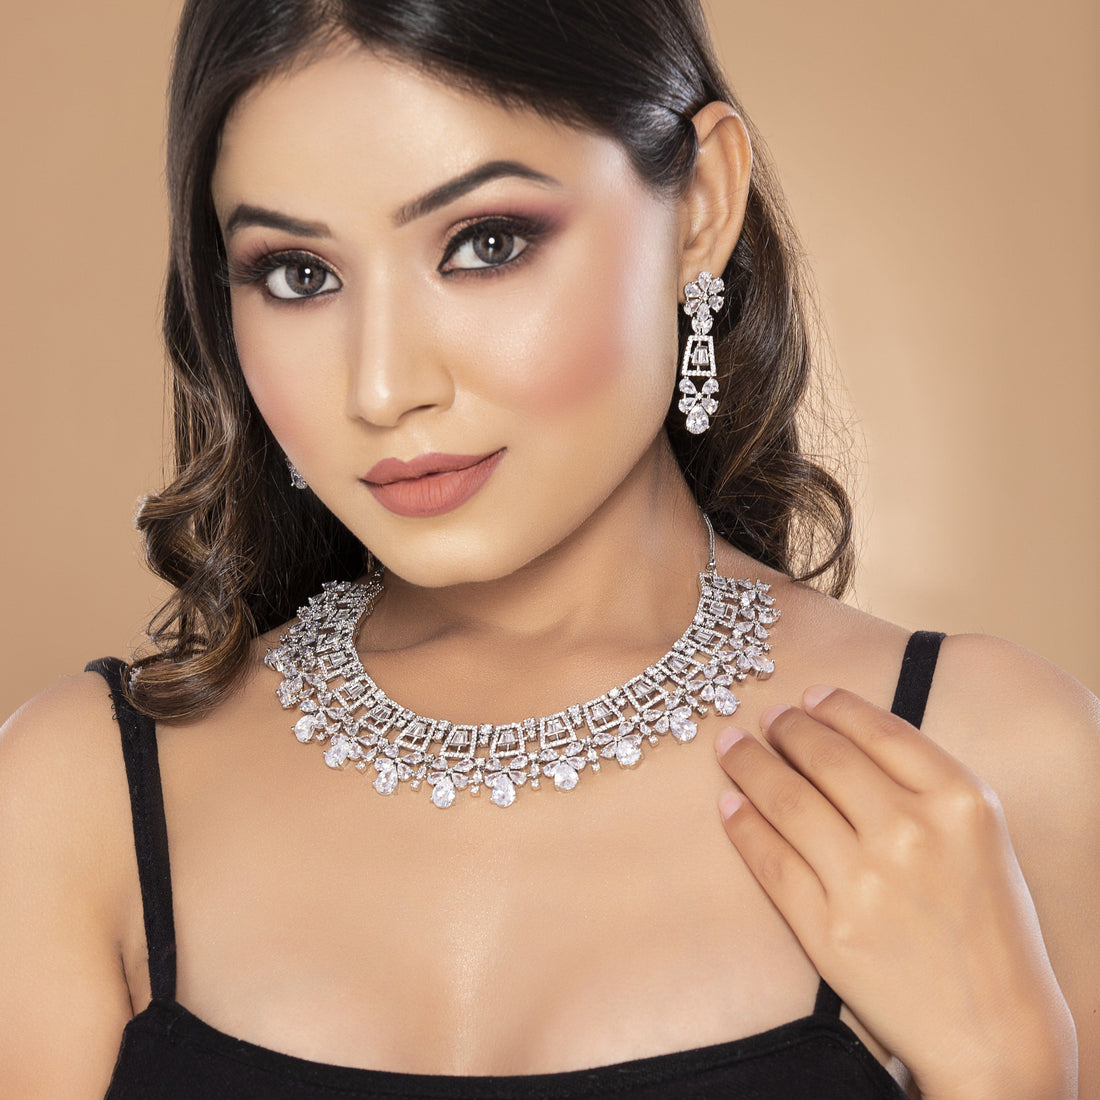 Blingvine adds a new collection of Indian Jewellery to its Fashion Jewelry Portfolio following the ‘Vocal for Local’ campaign.